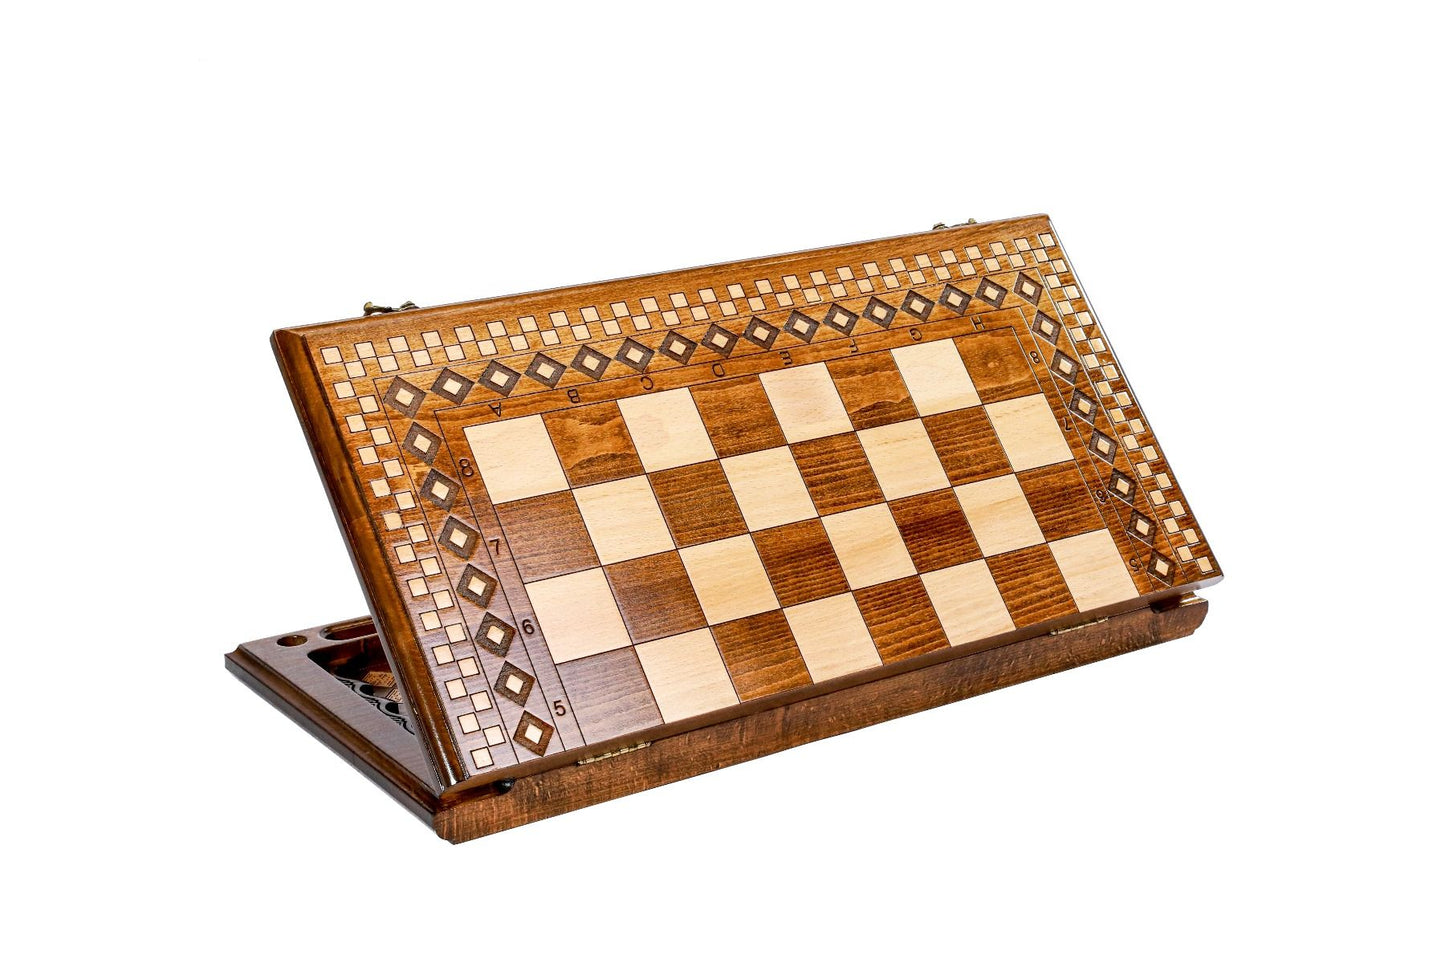 Engage in the timeless strategy of chess with a set that highlights the artistry of Armenian carpet weaving in its design and craftsmanship.